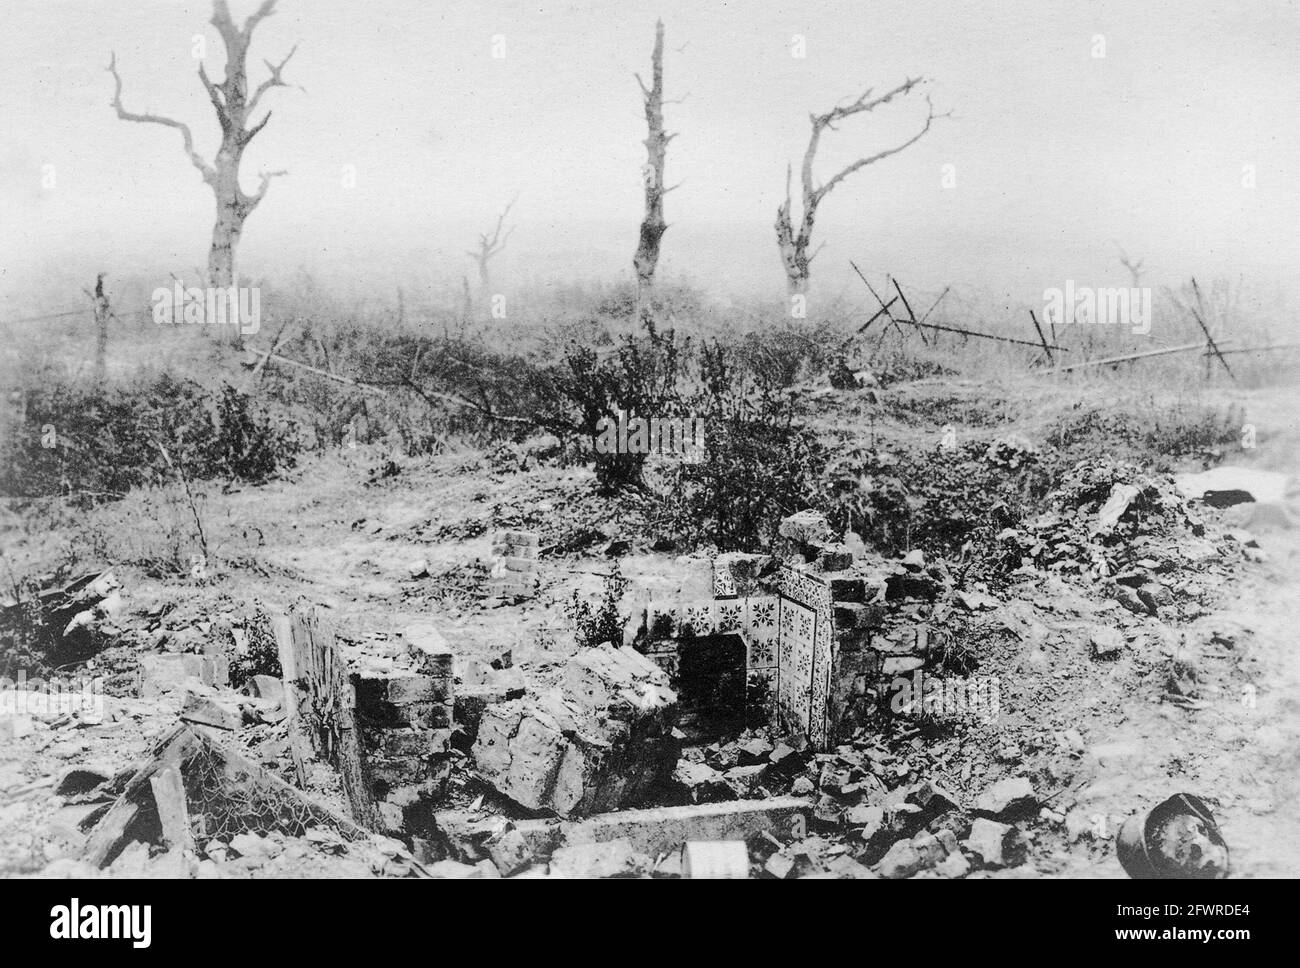 No Man’s Land at Malancourt, Meuse-Argonne, France, 1918. The first line of trenches are directly in front of the ruined house. Stock Photo